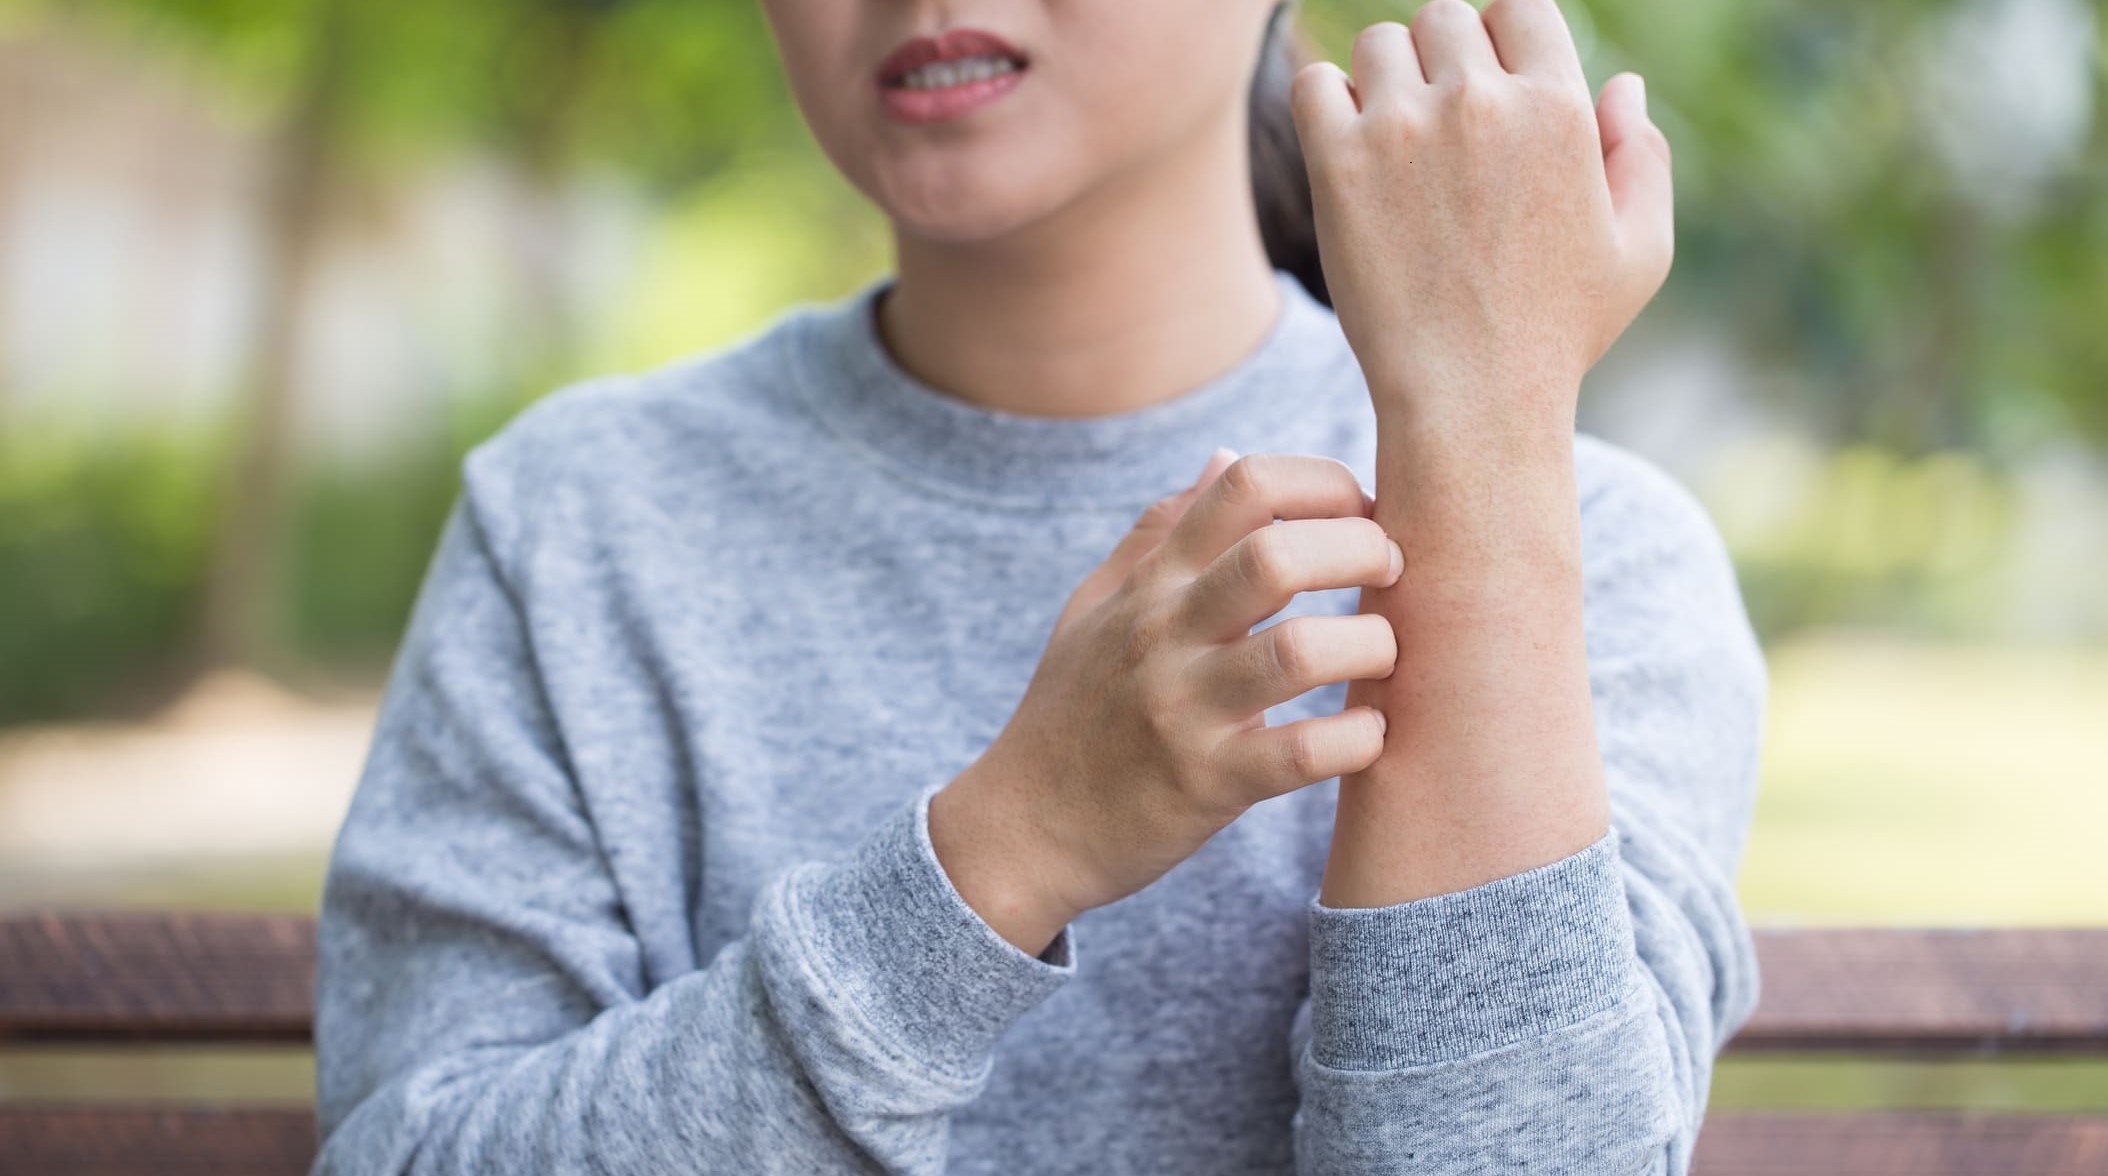 Psoriasis Vs Eczema: What’s The Difference?